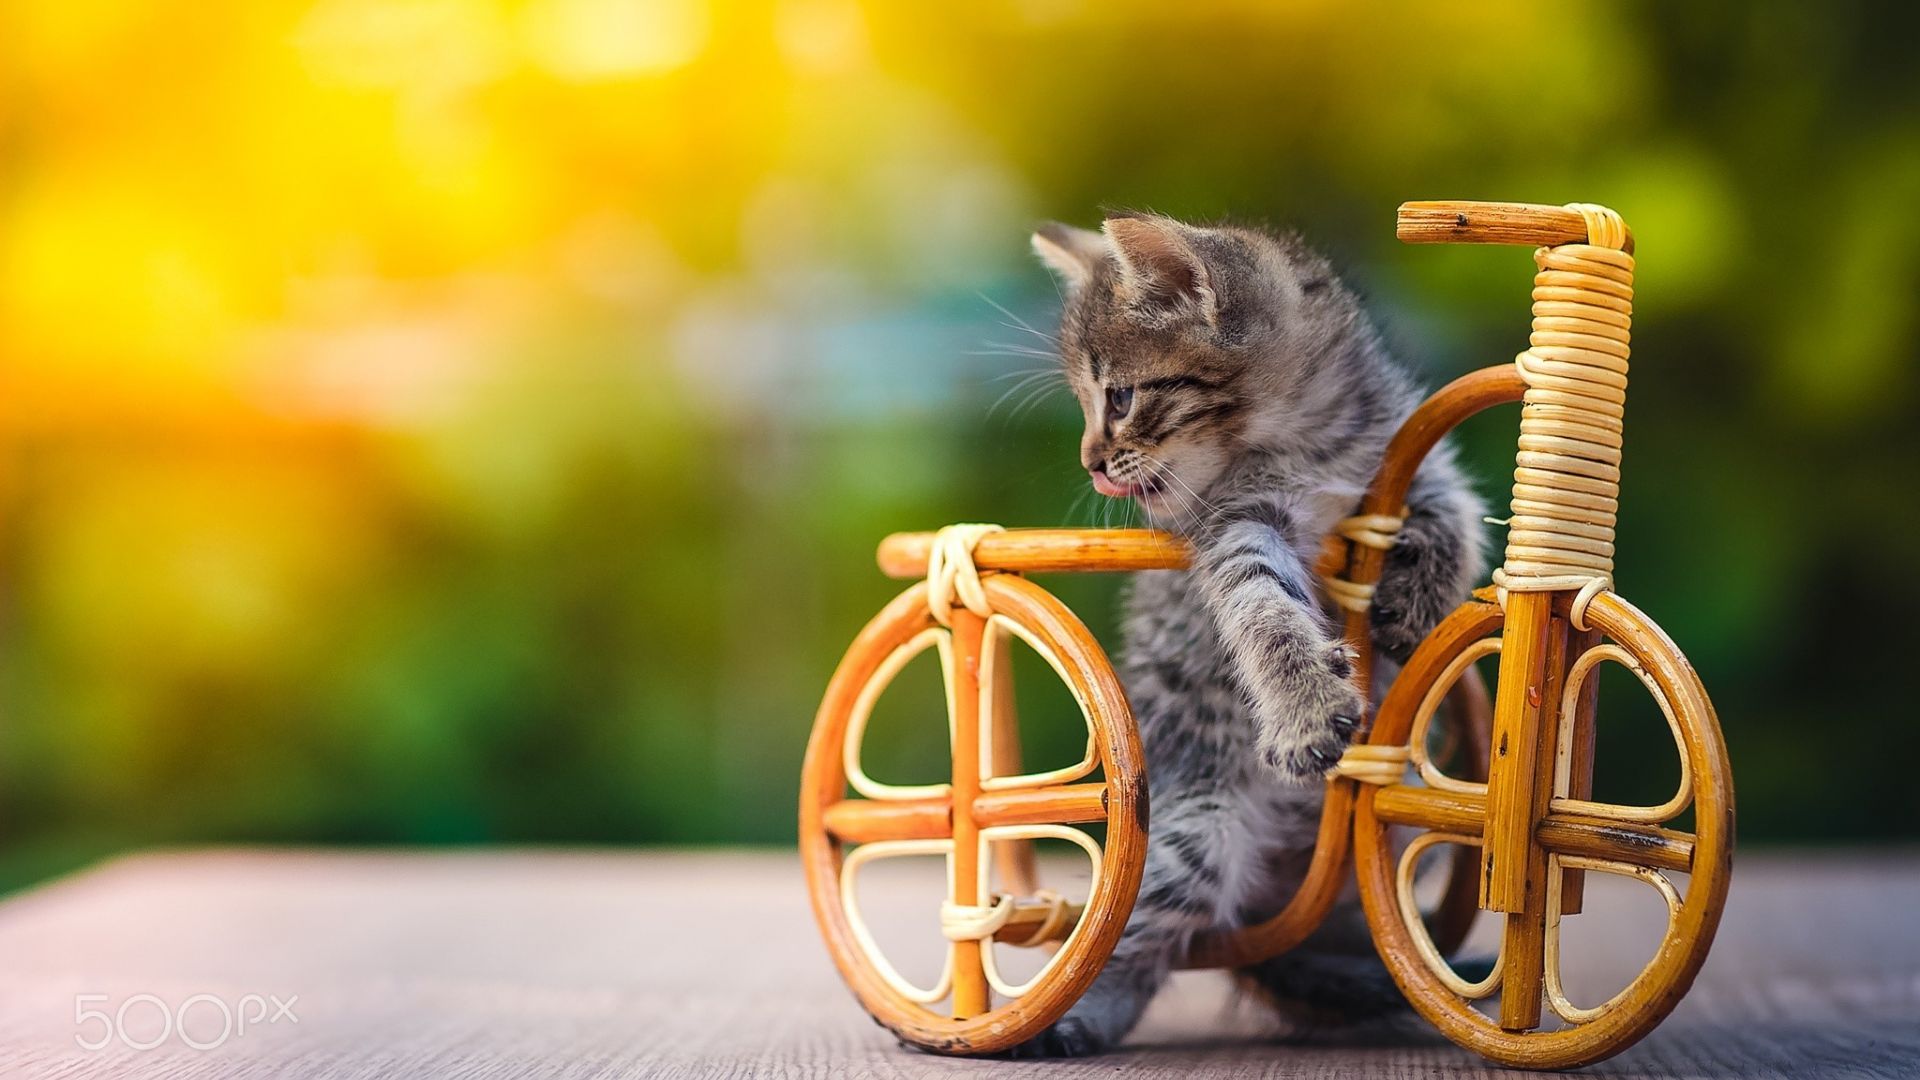 Wallpaper Kitten with cycle toy 